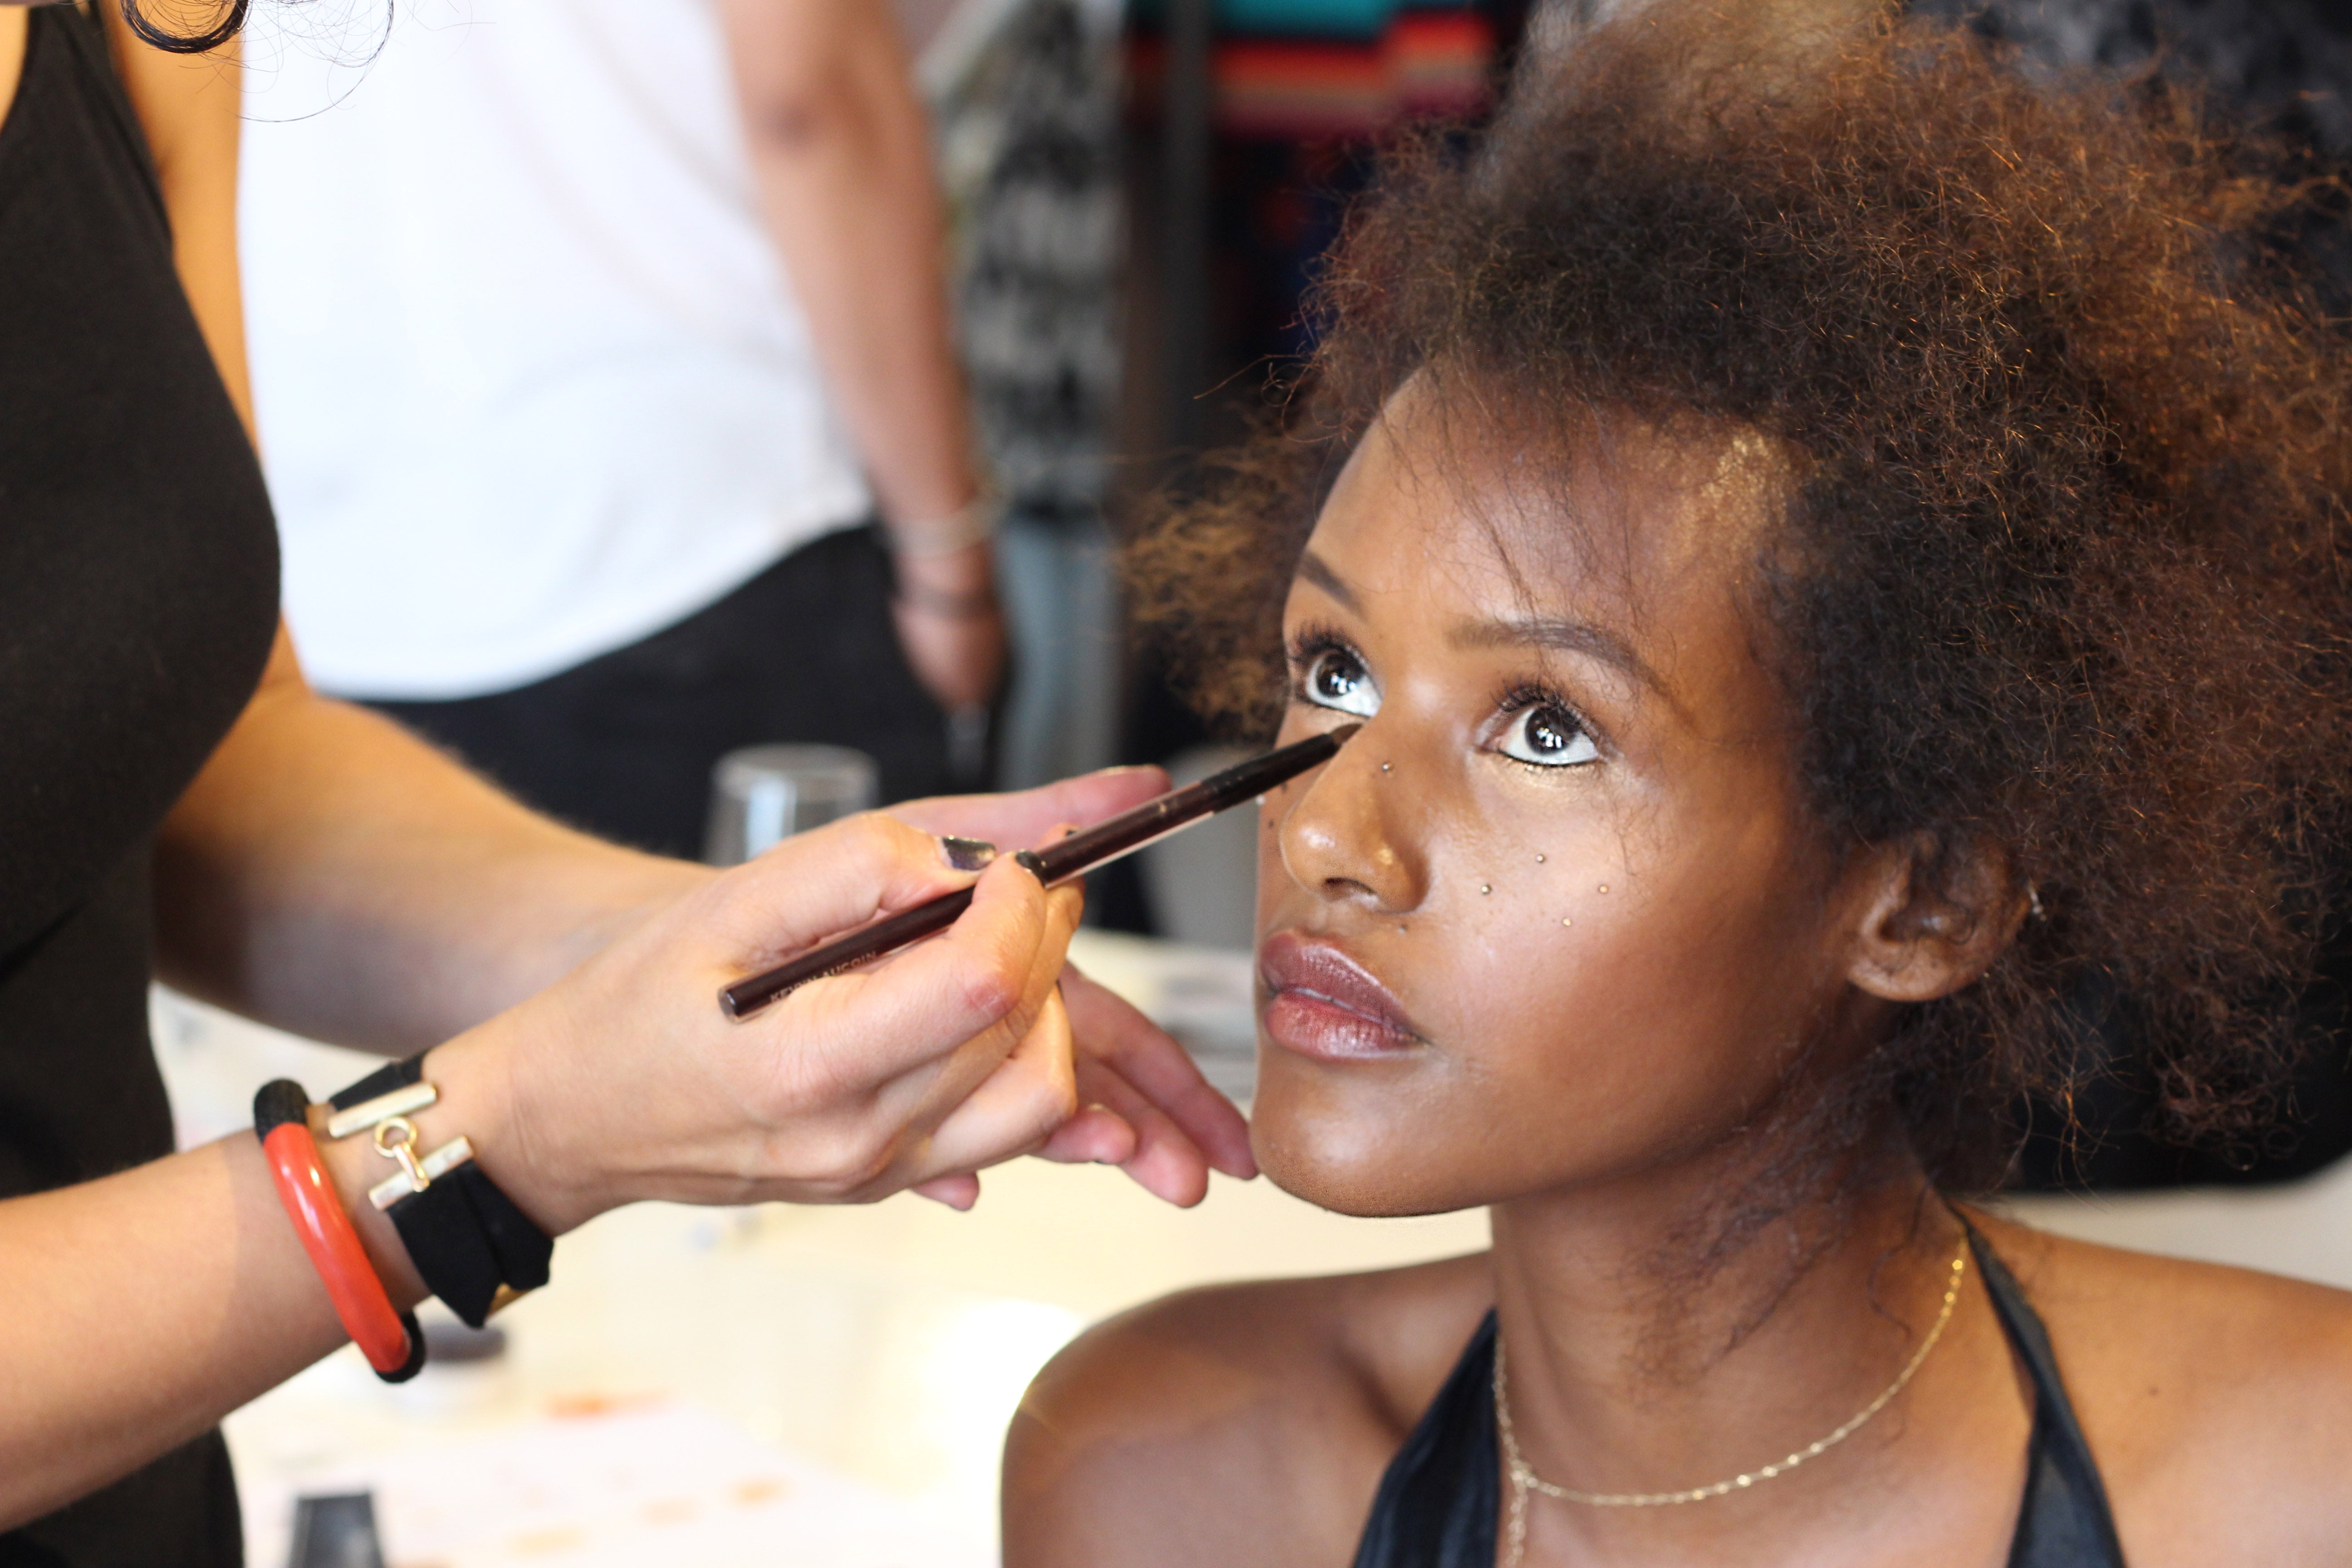 Get The Look from Tracy Reese's Catwalk